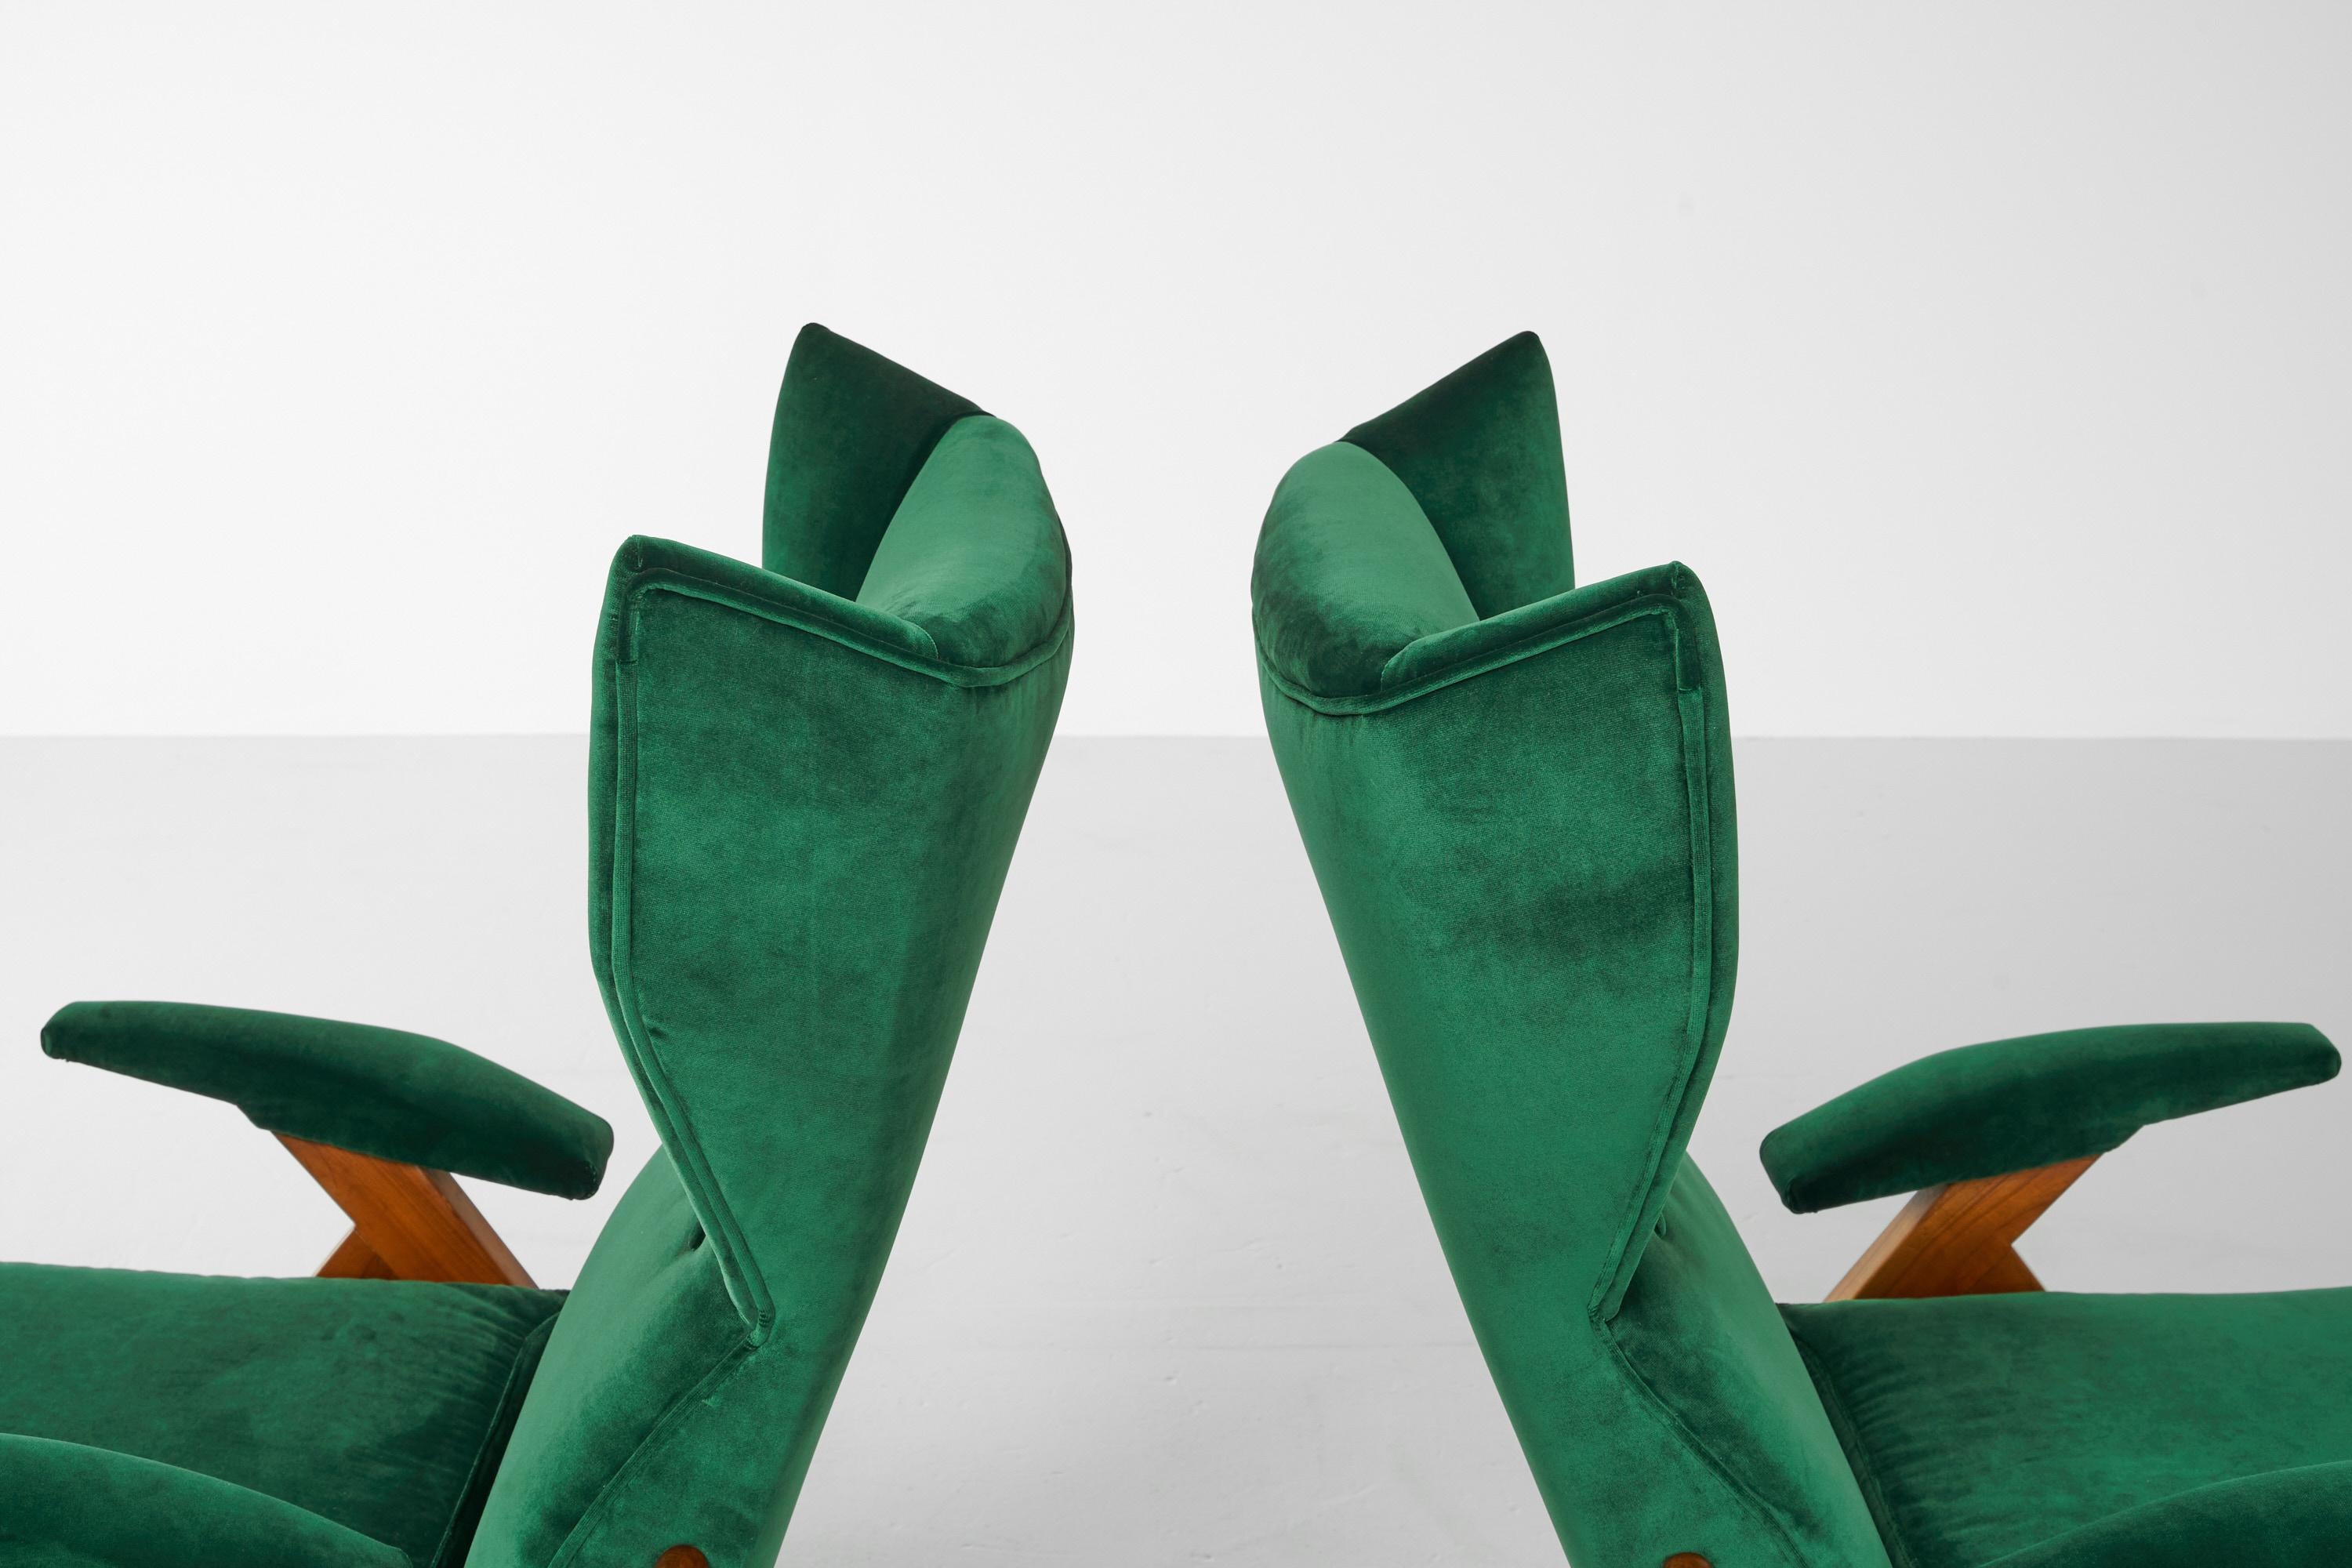 Mid-20th Century Renzo Franchi Adjustable Lounge Chairs Camea, Italy, 1955